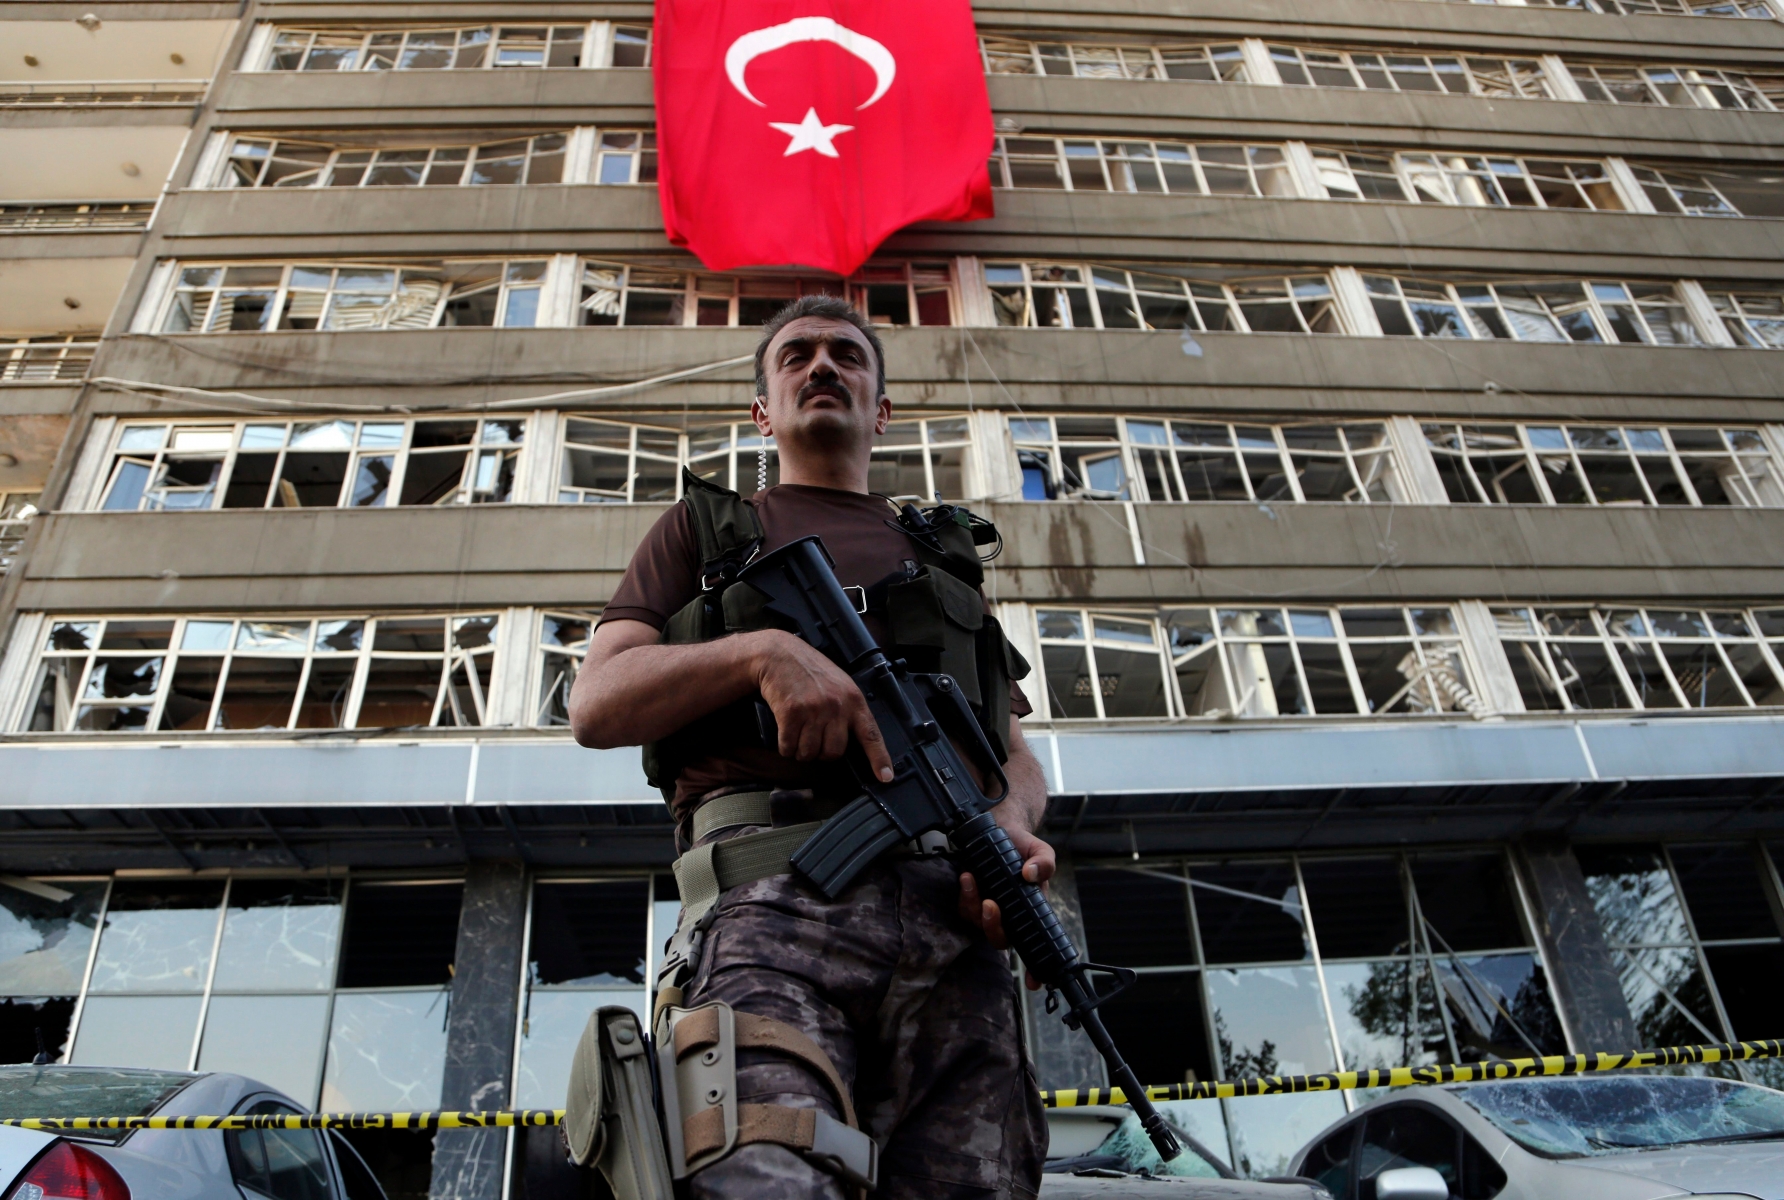 A Turkish special forces policeman stands guard in front of a damaged building inside the special forces policemen base which was attacked by the Turkish warplanes during the failed military coup last Friday, in Ankara, Turkey, Tuesday, July 19, 2016. The violence surrounding the Friday night coup attempt claimed the lives of 208 government supporters and 24 coup plotters, according to the government. Turkey says Fethullah Gulen, a U.S.-based Muslim cleric, was behind the coup and has demanded his extradition. Gulen has denied any knowledge of the failed coup. (AP Photo/Hussein Malla) Turkey Military Coup